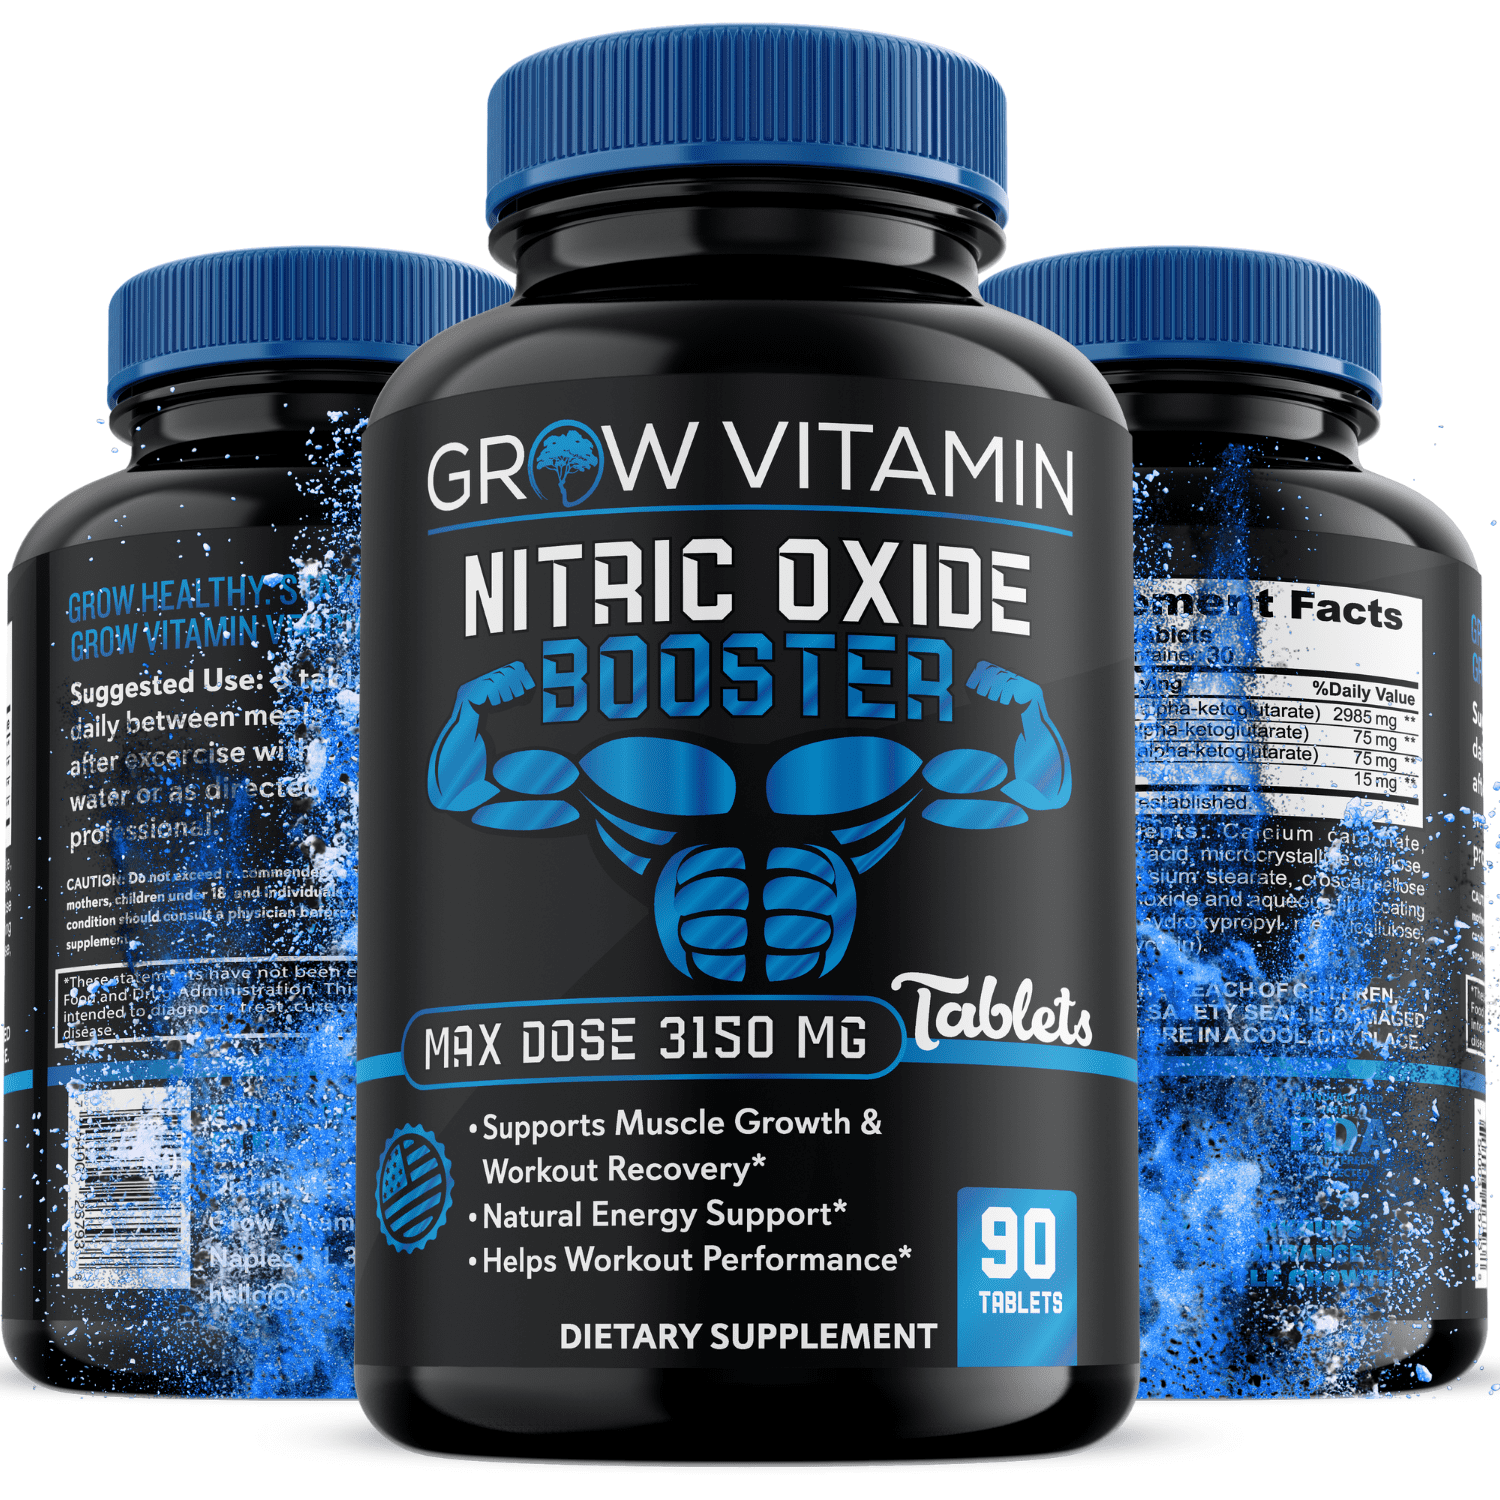 Nitric oxide booster supplements